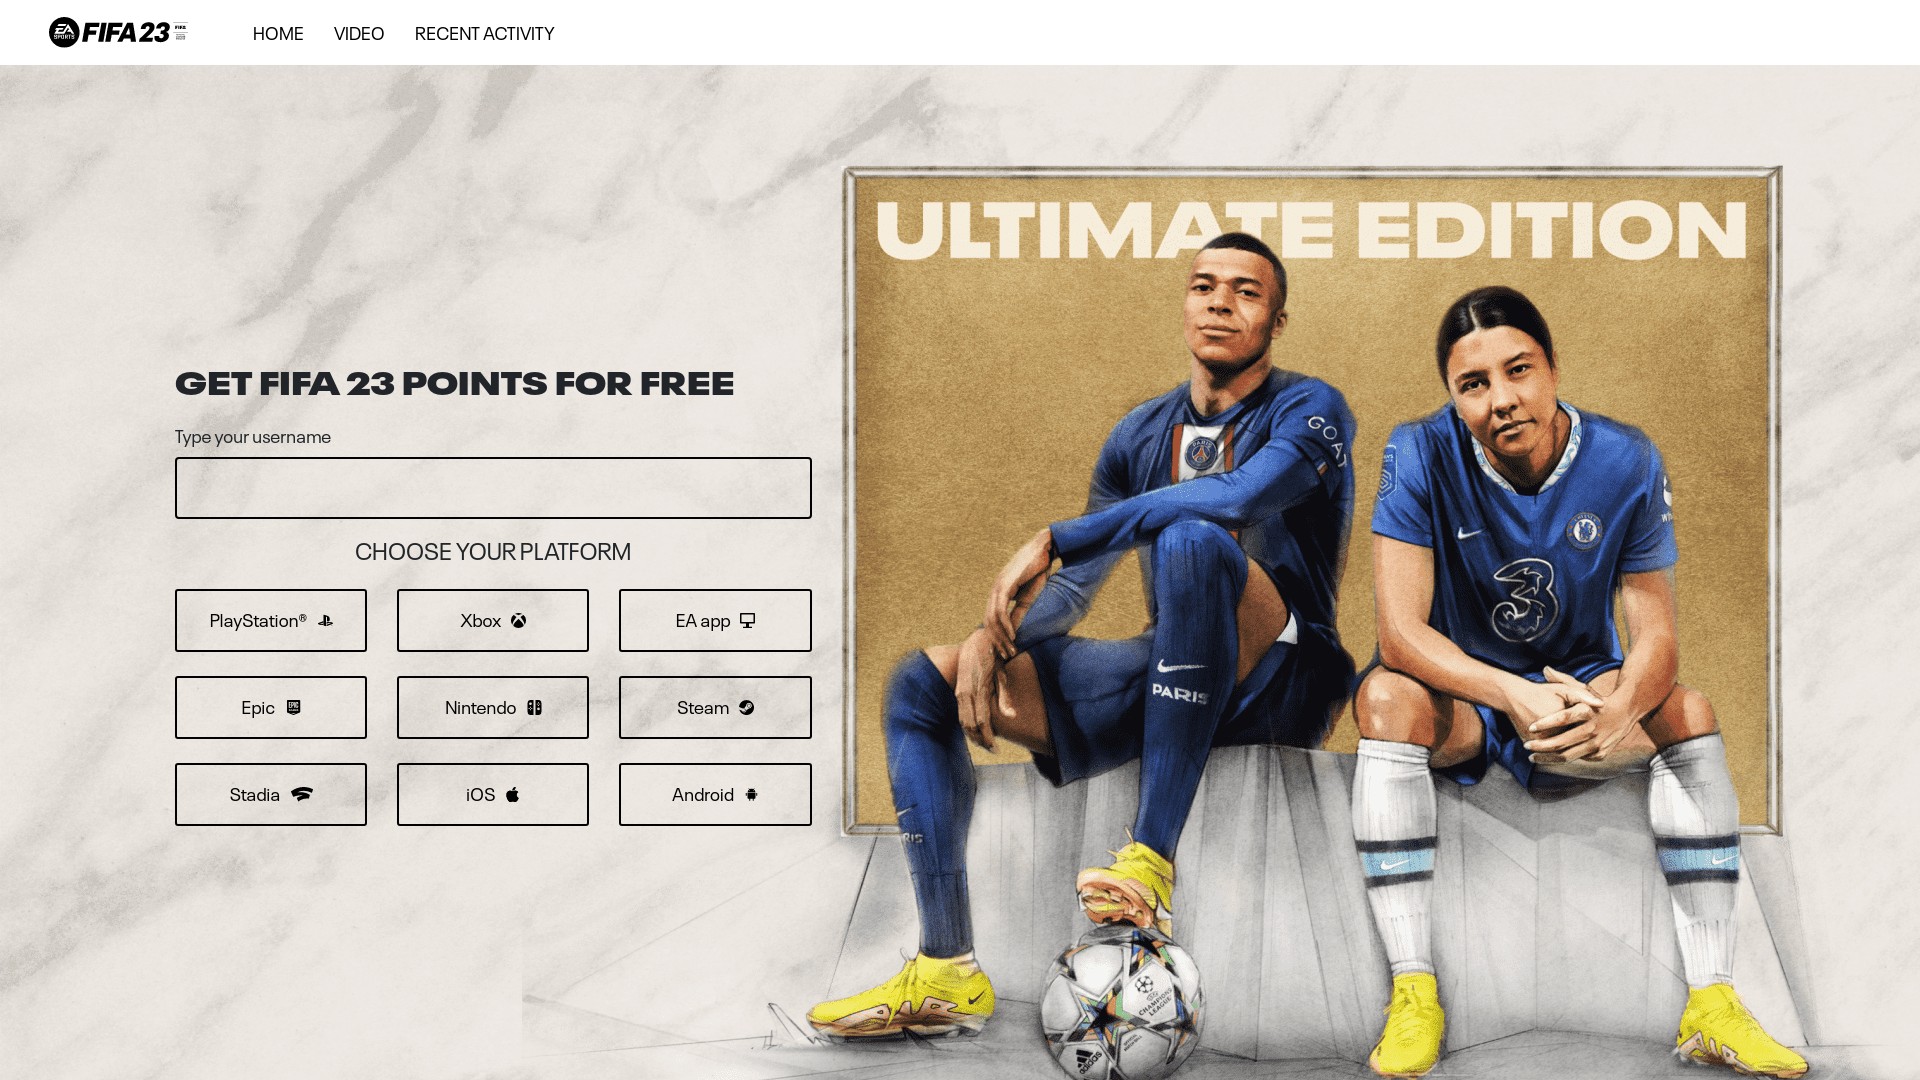 FiFa23points located at fifa23points.com